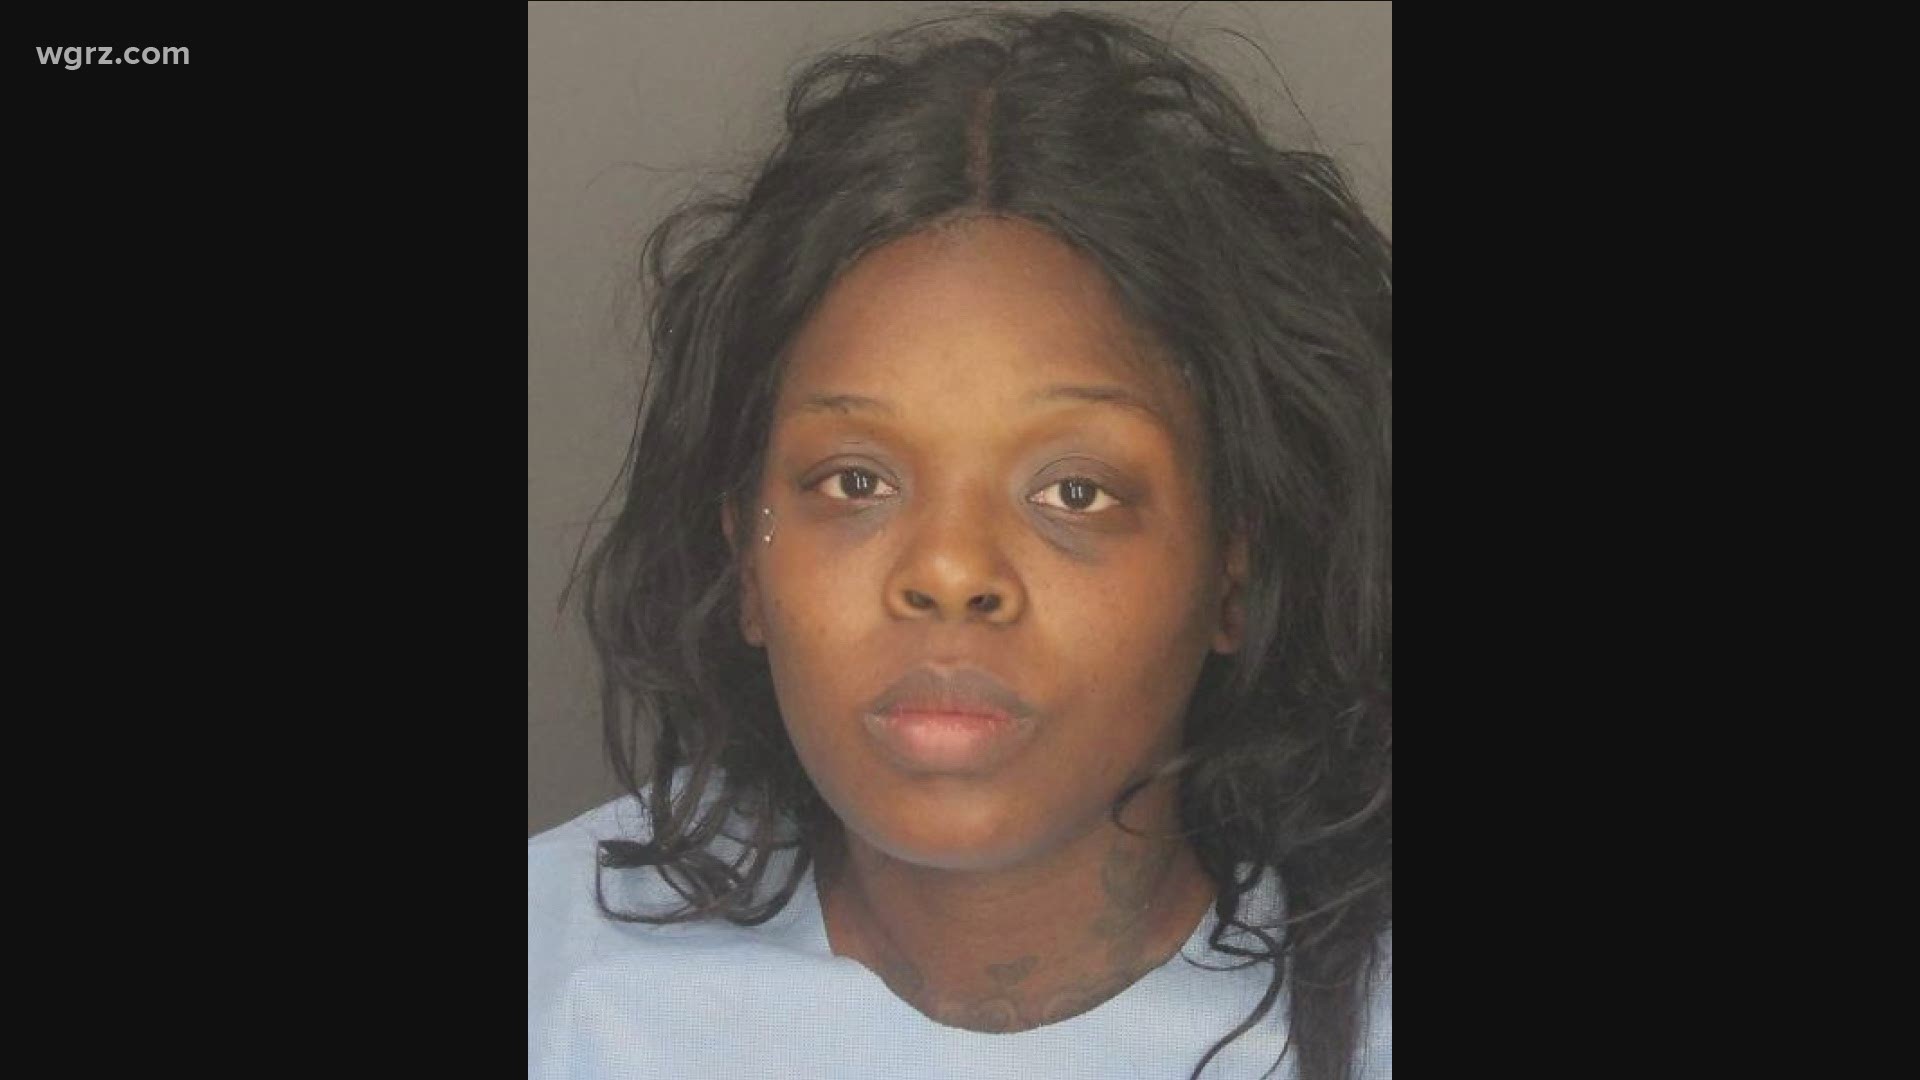 New York State Police say Deyanna J. Davis, 30, was driving the vehicle that allegedly struck and injured 3 law enforcement officers on Bailey Avenue in Buffalo.